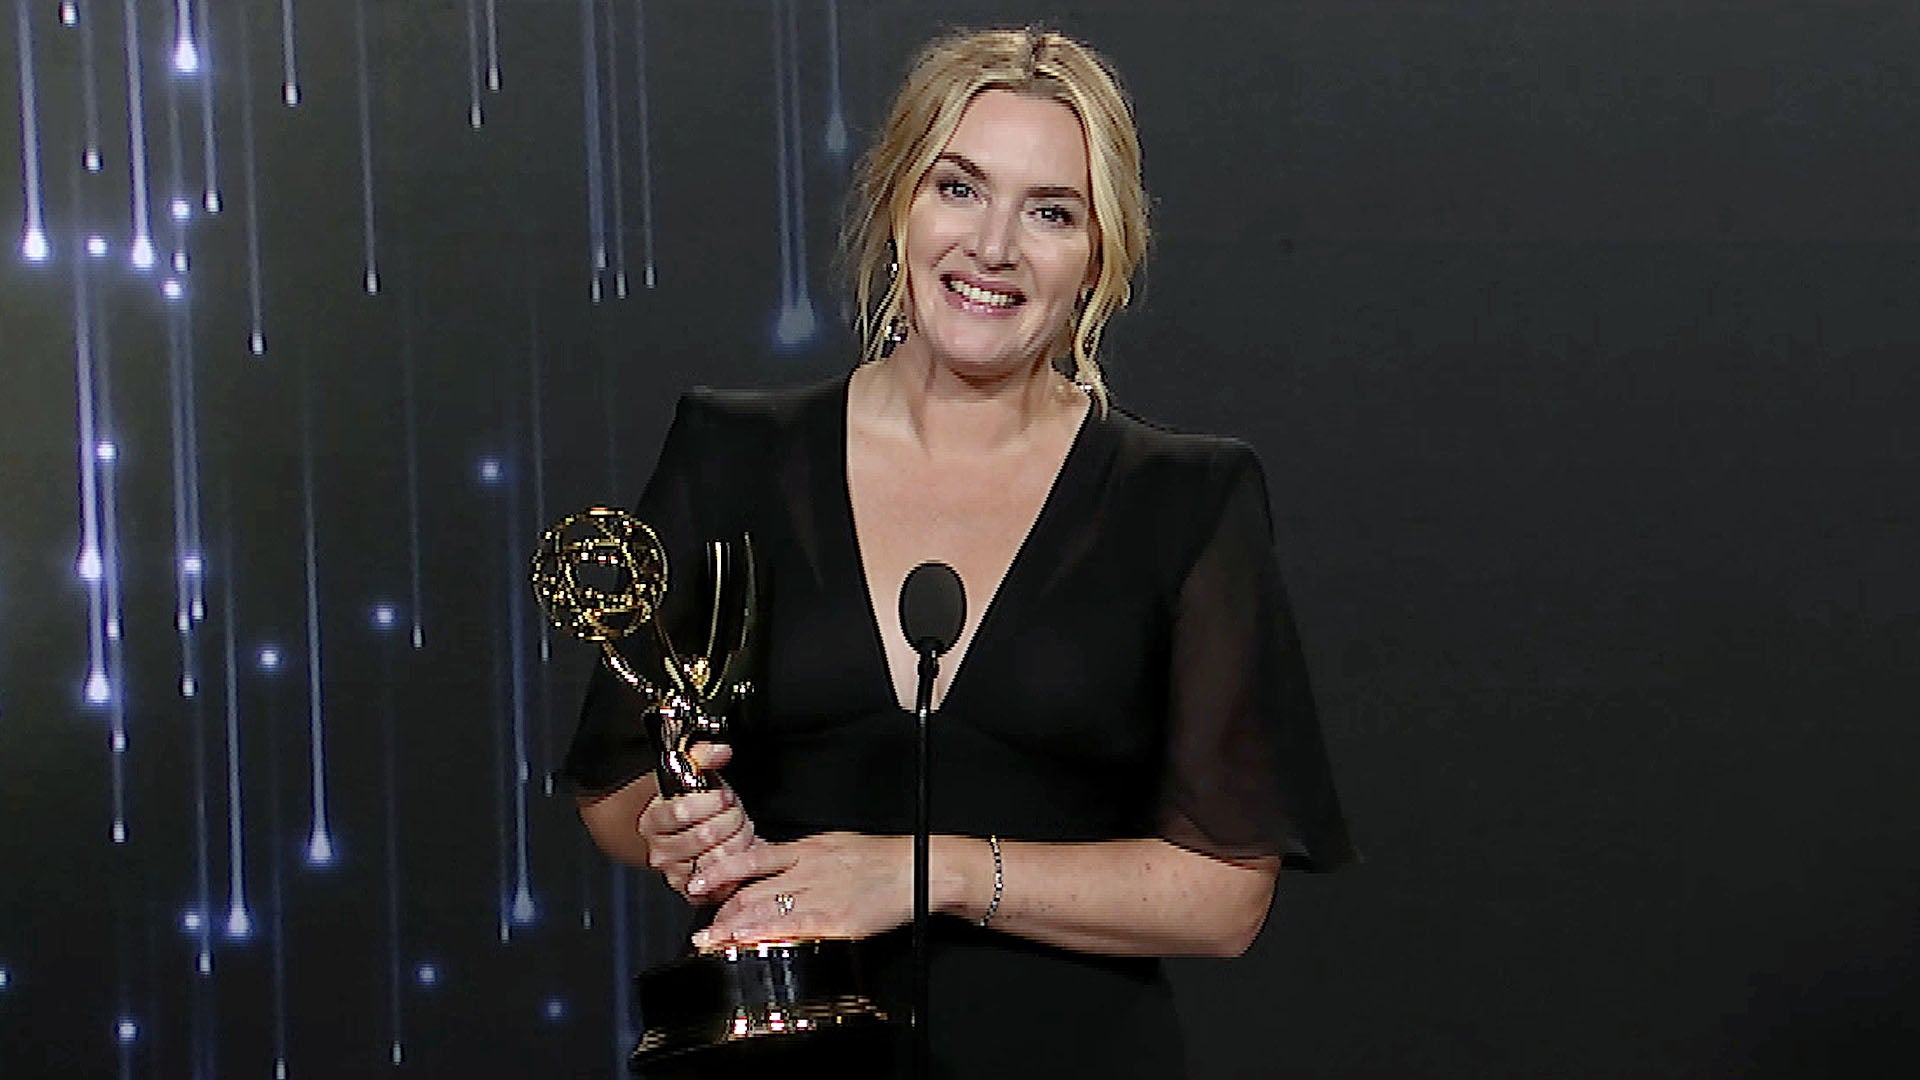 Kate Winslet wearing a black dress while holding a gold Emmy trophy